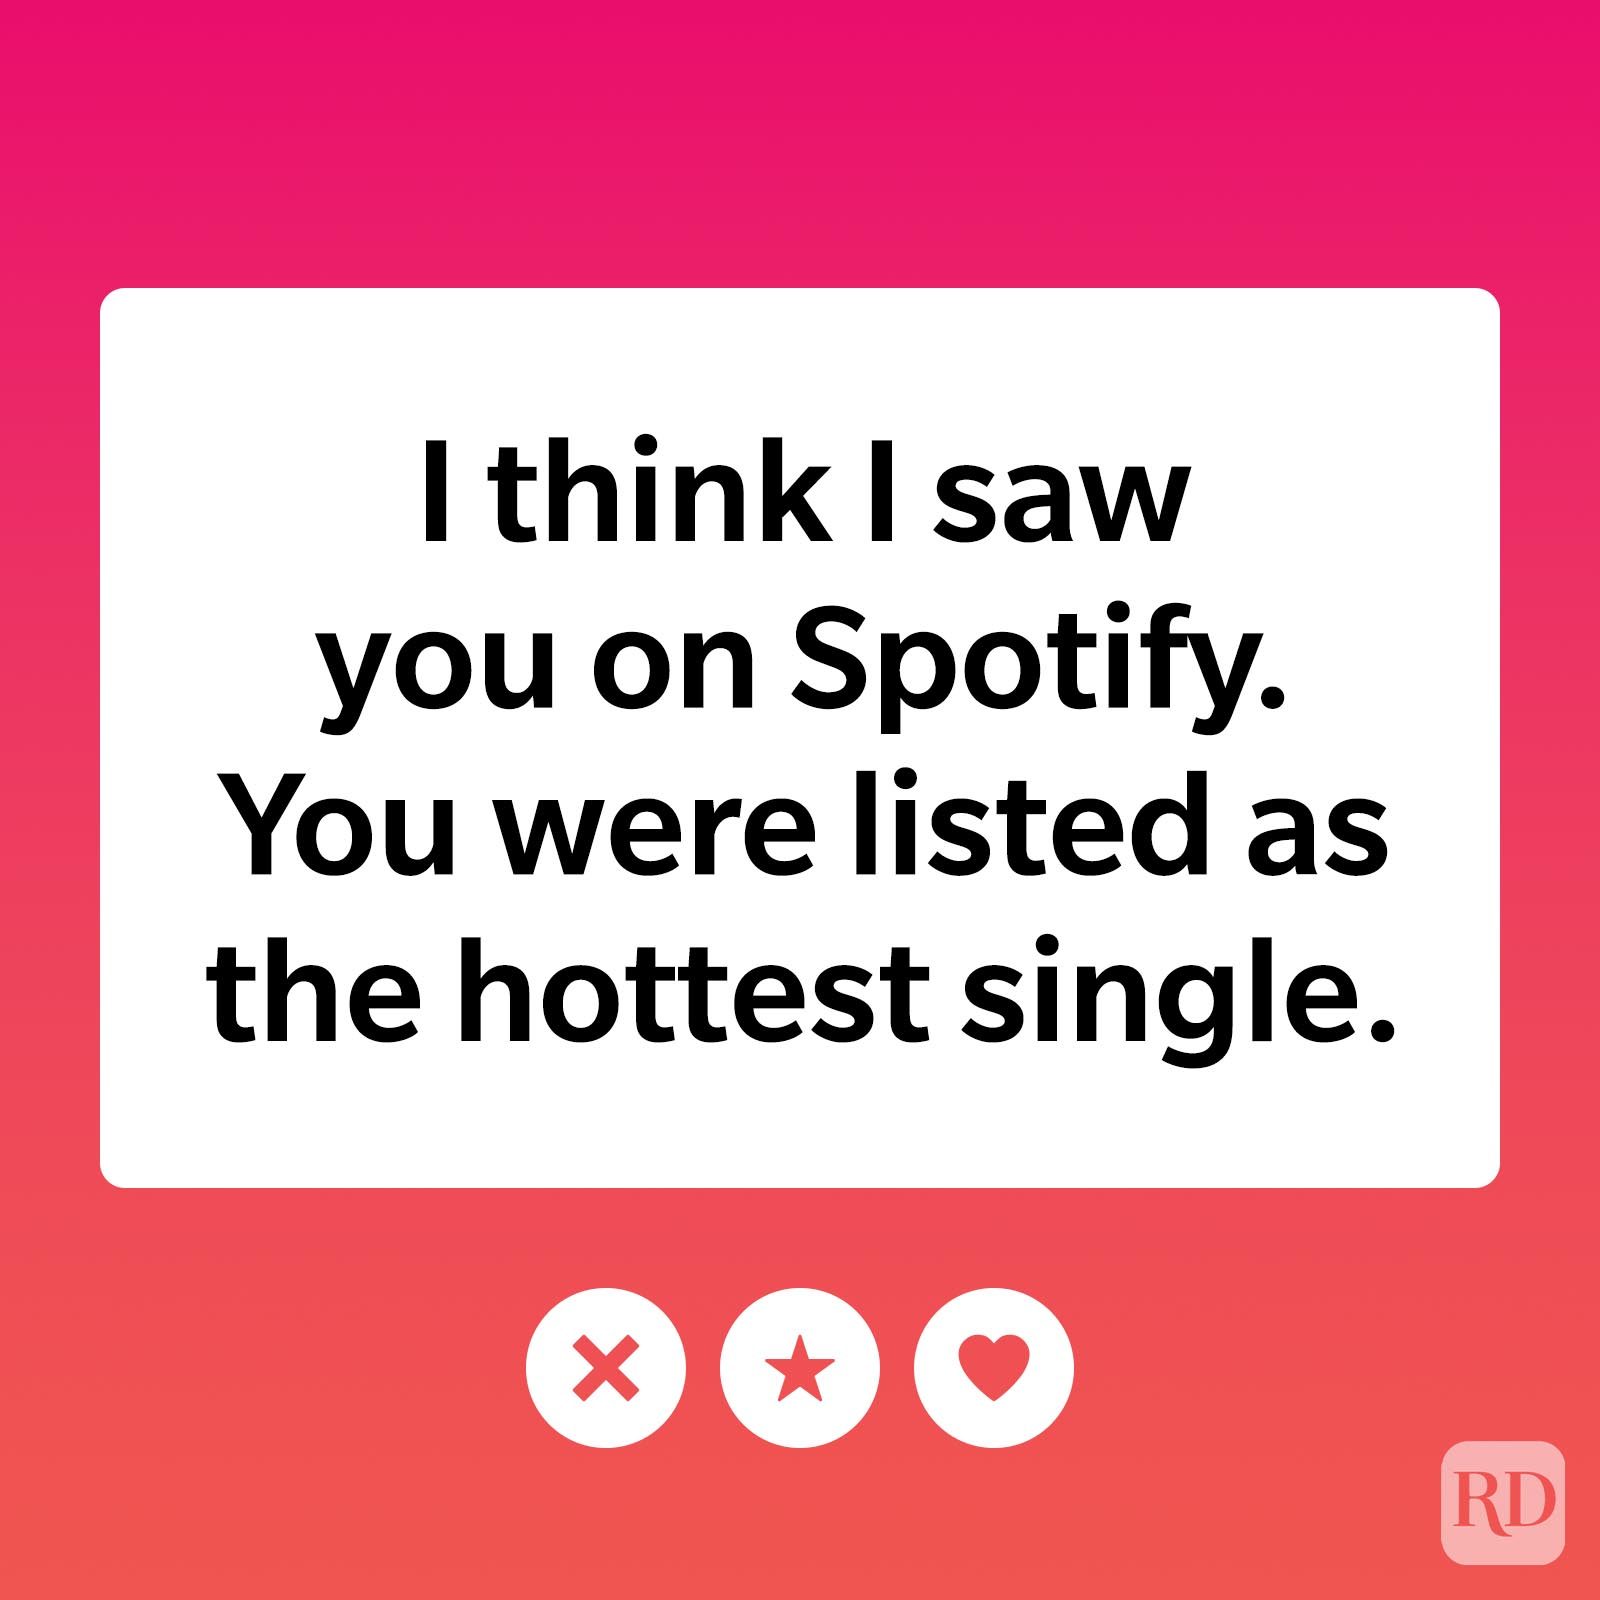 I think I saw you on Spotify. You were listed as the hottest single.